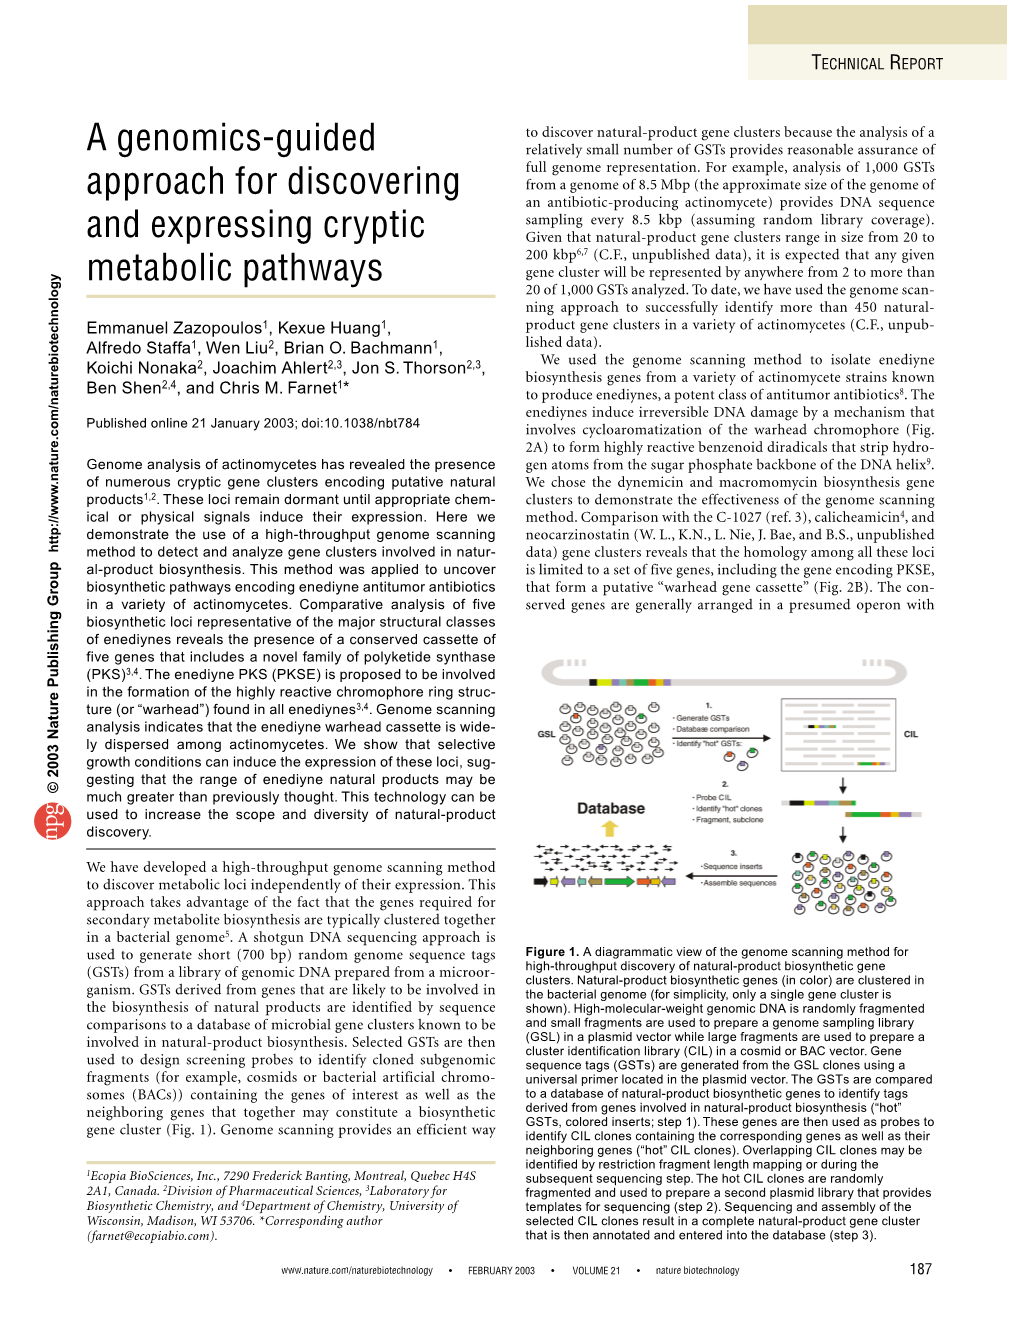 A Genomics-Guided Approach for Discovering and Expressing Cryptic